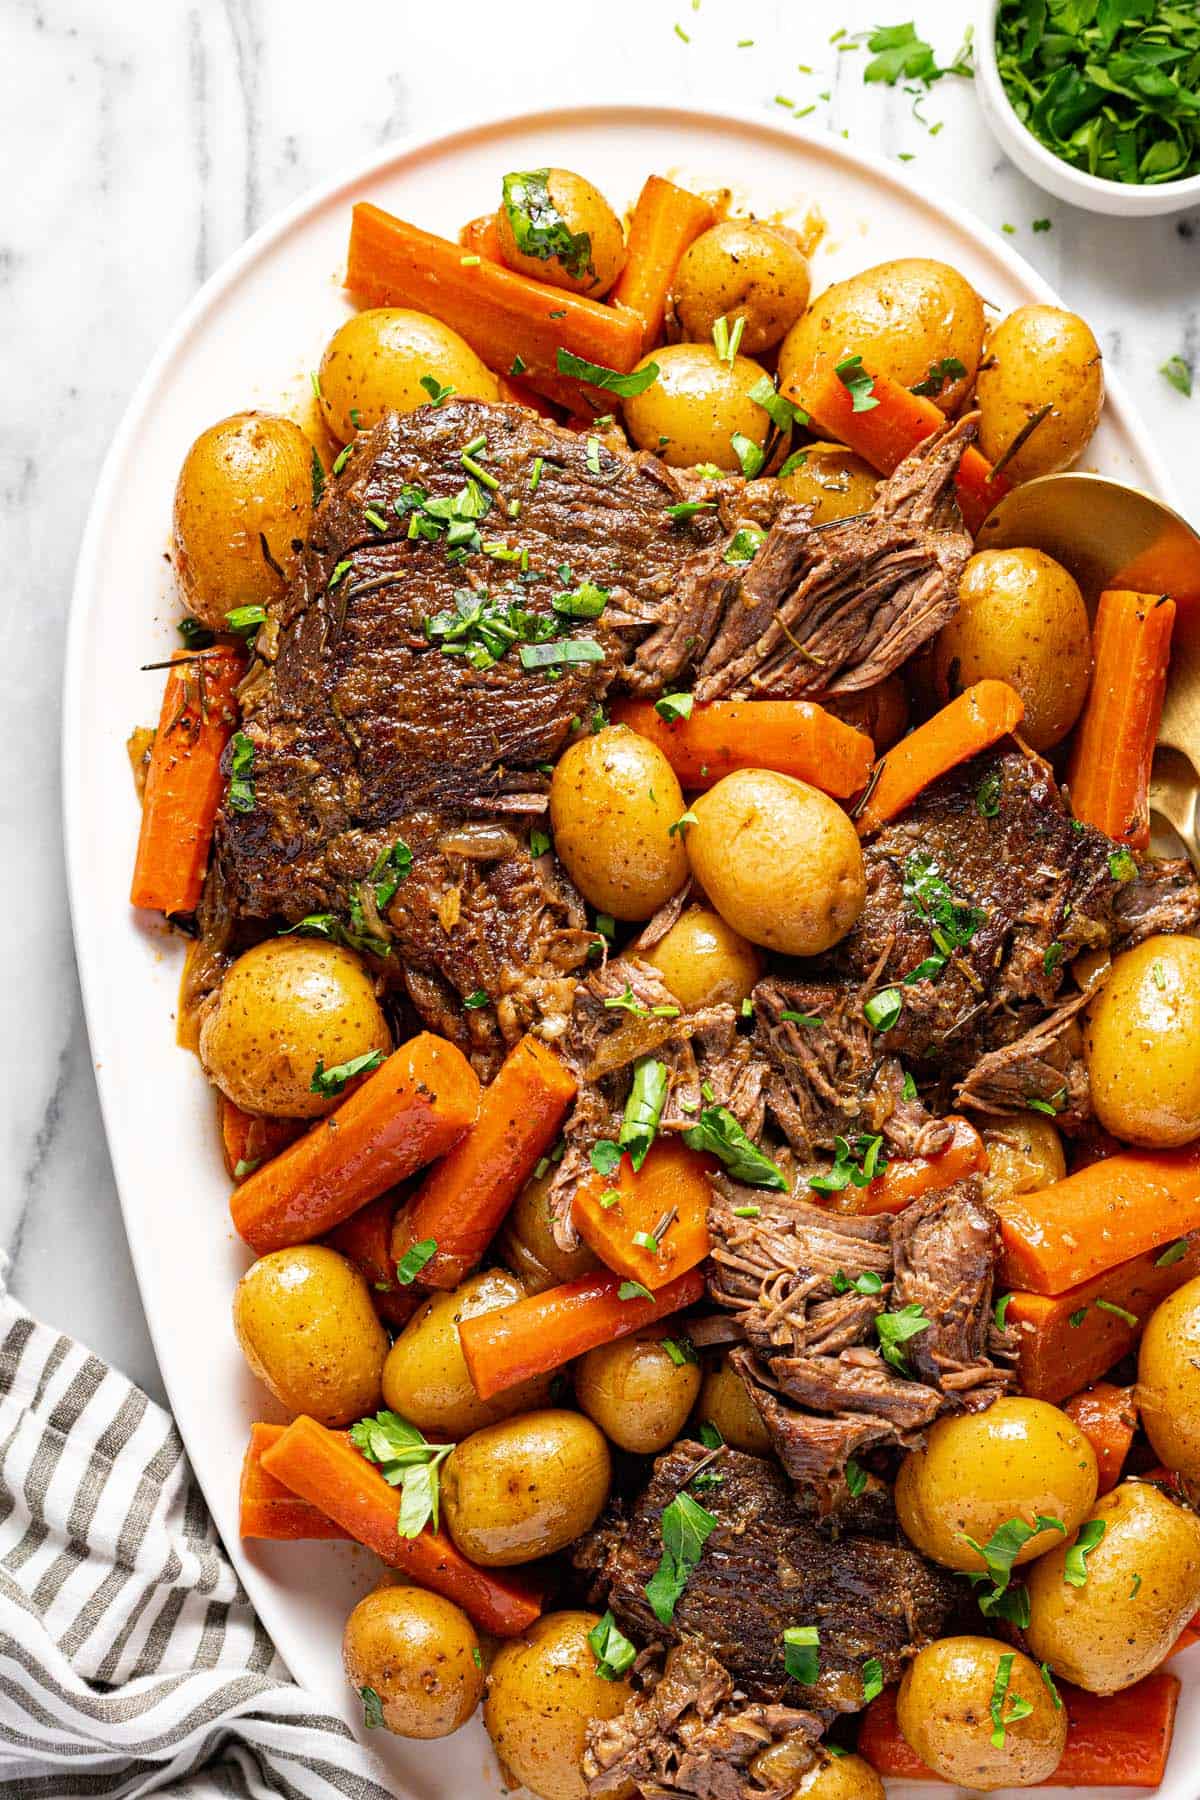 Large serving platter filled with shredded pot roast, carrots, and potatoes garnished with parsley. 